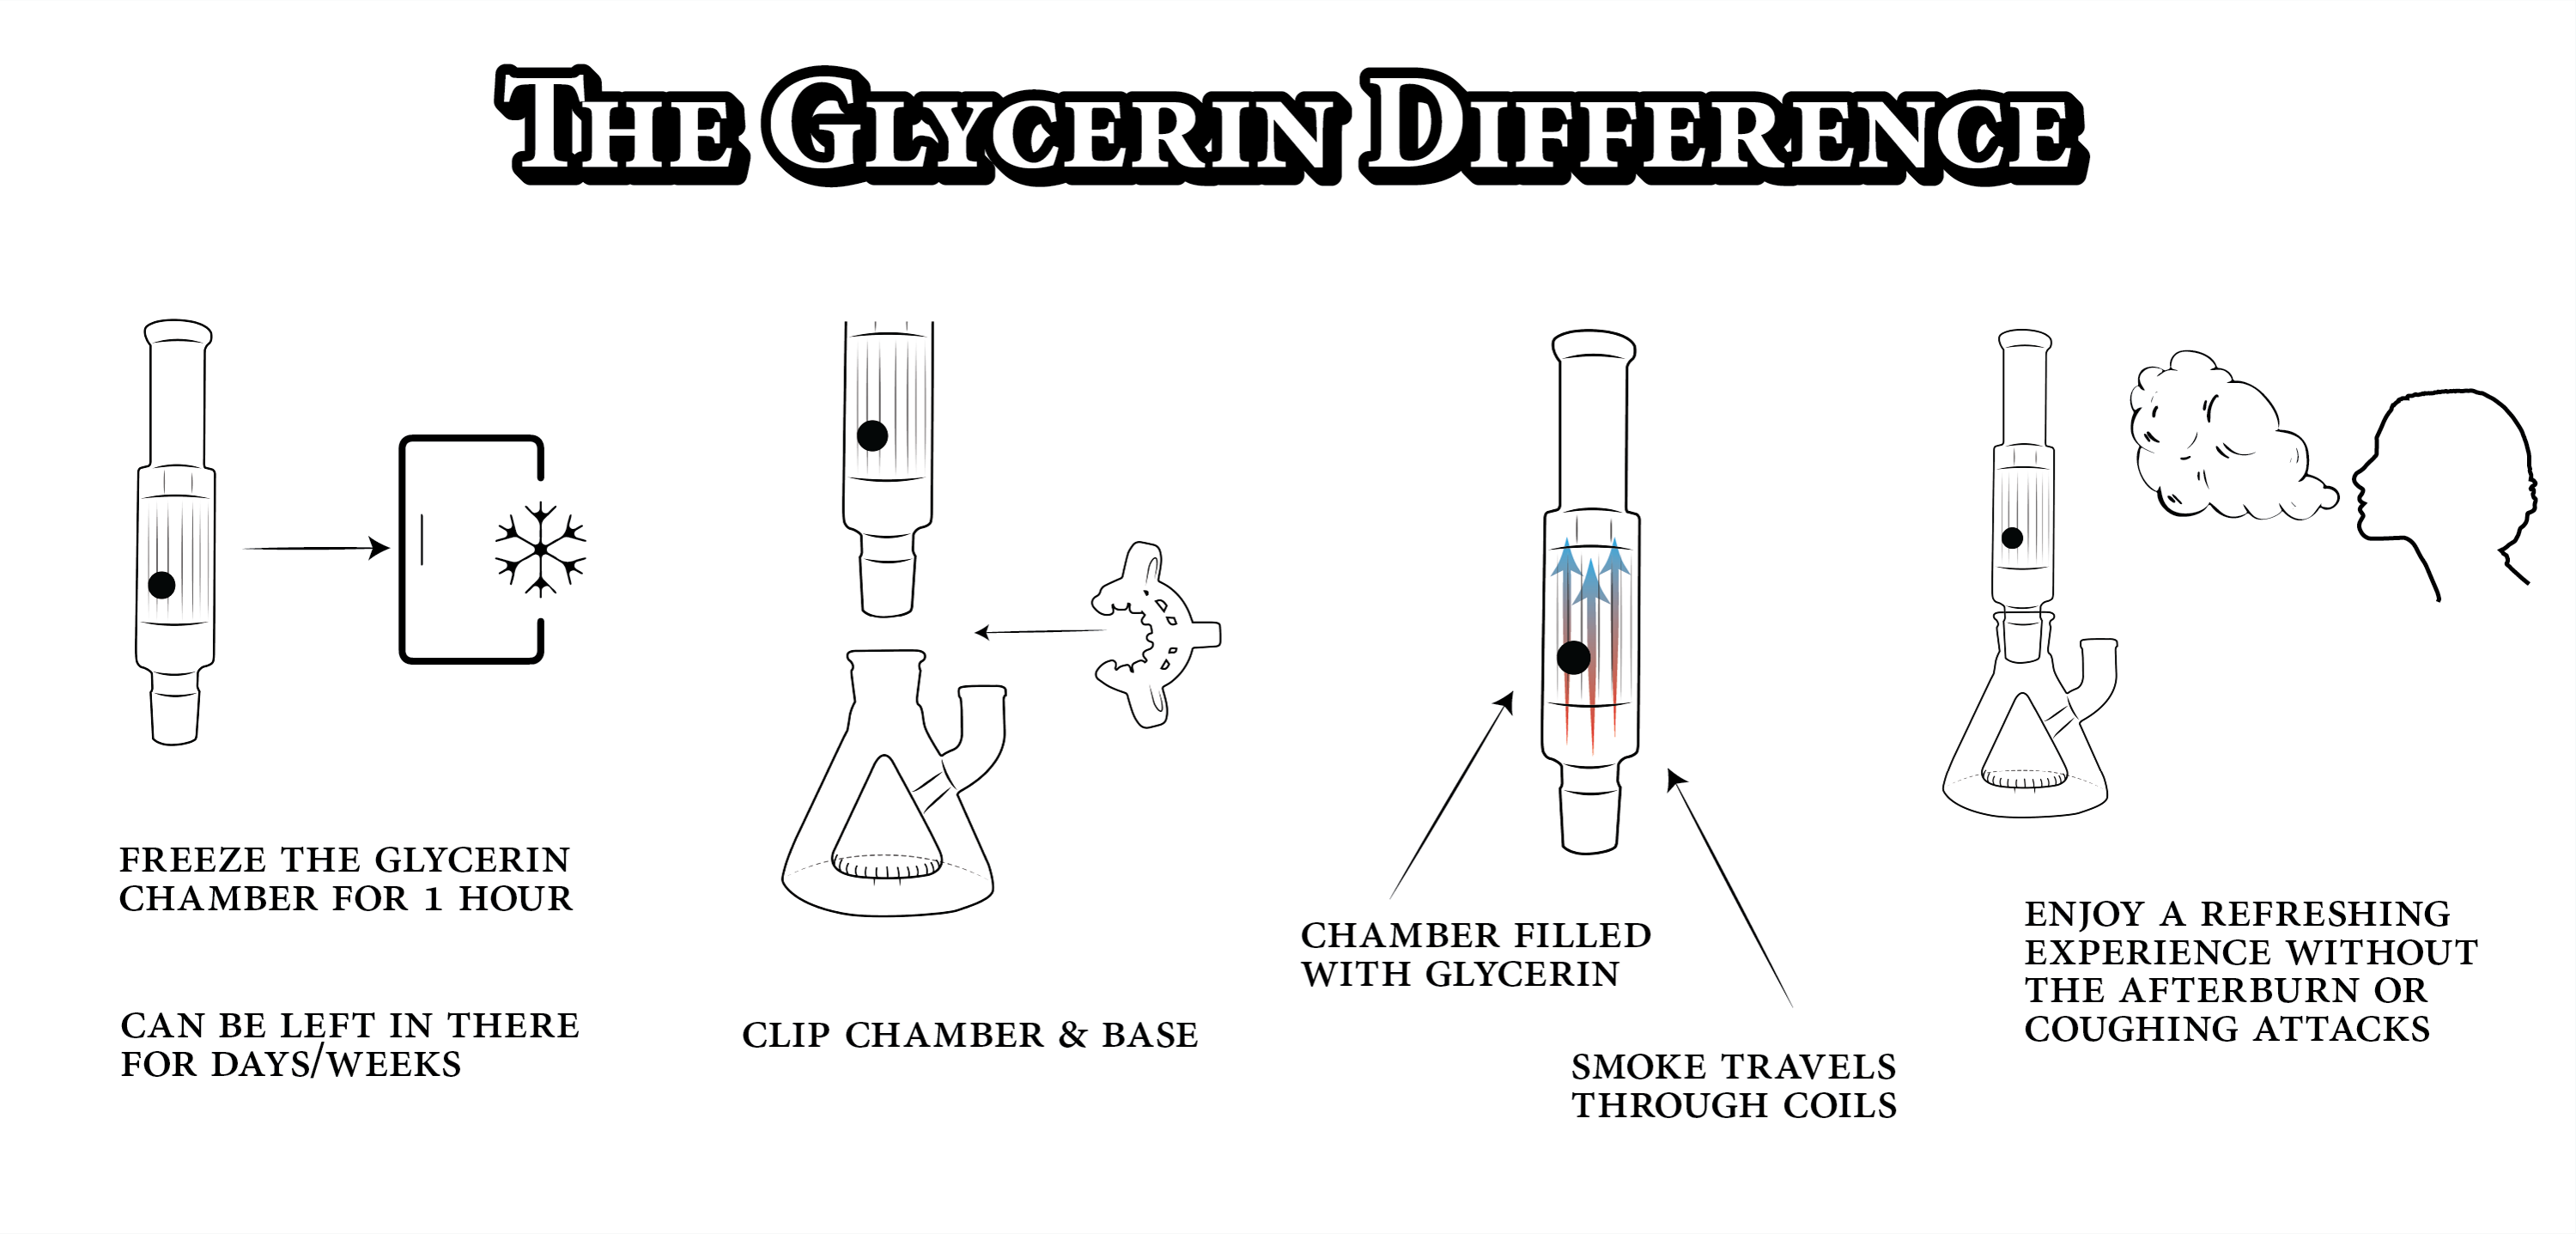 glycerin difference graphic